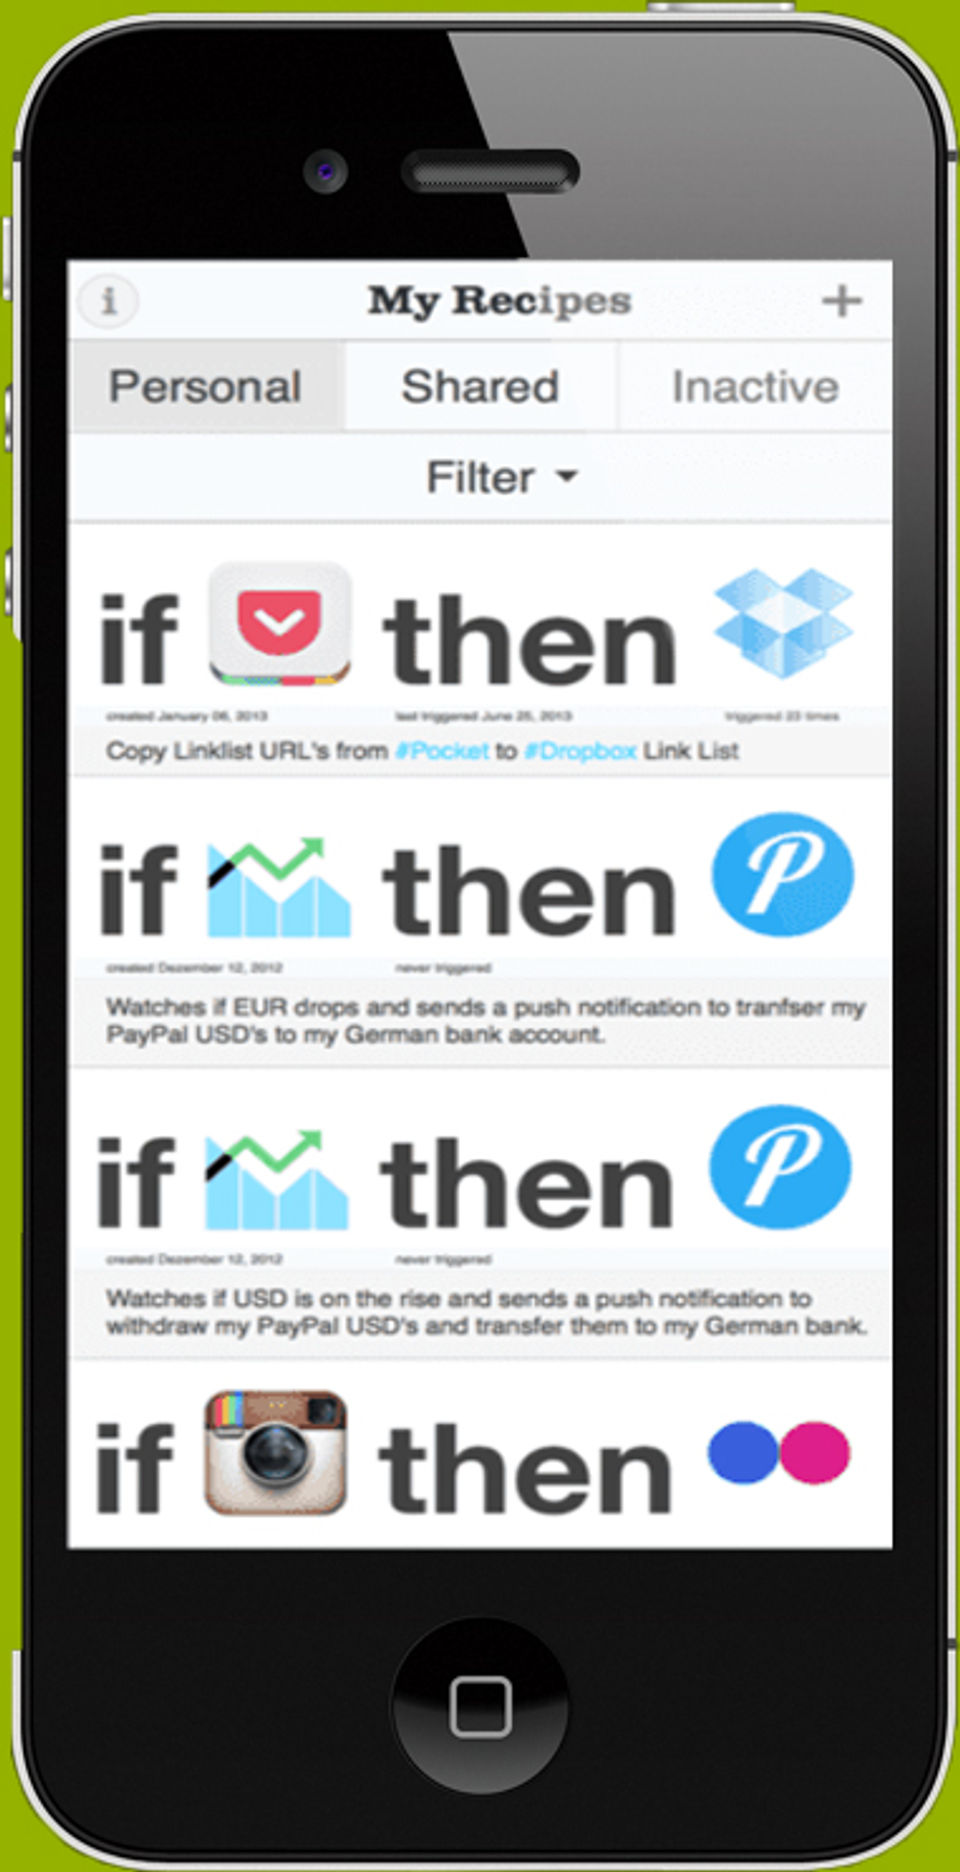 IFTTT screenshot: Allows users to filter different recipes, and copy linklist URLs from various apps including Pocket and Dropbox-thumb